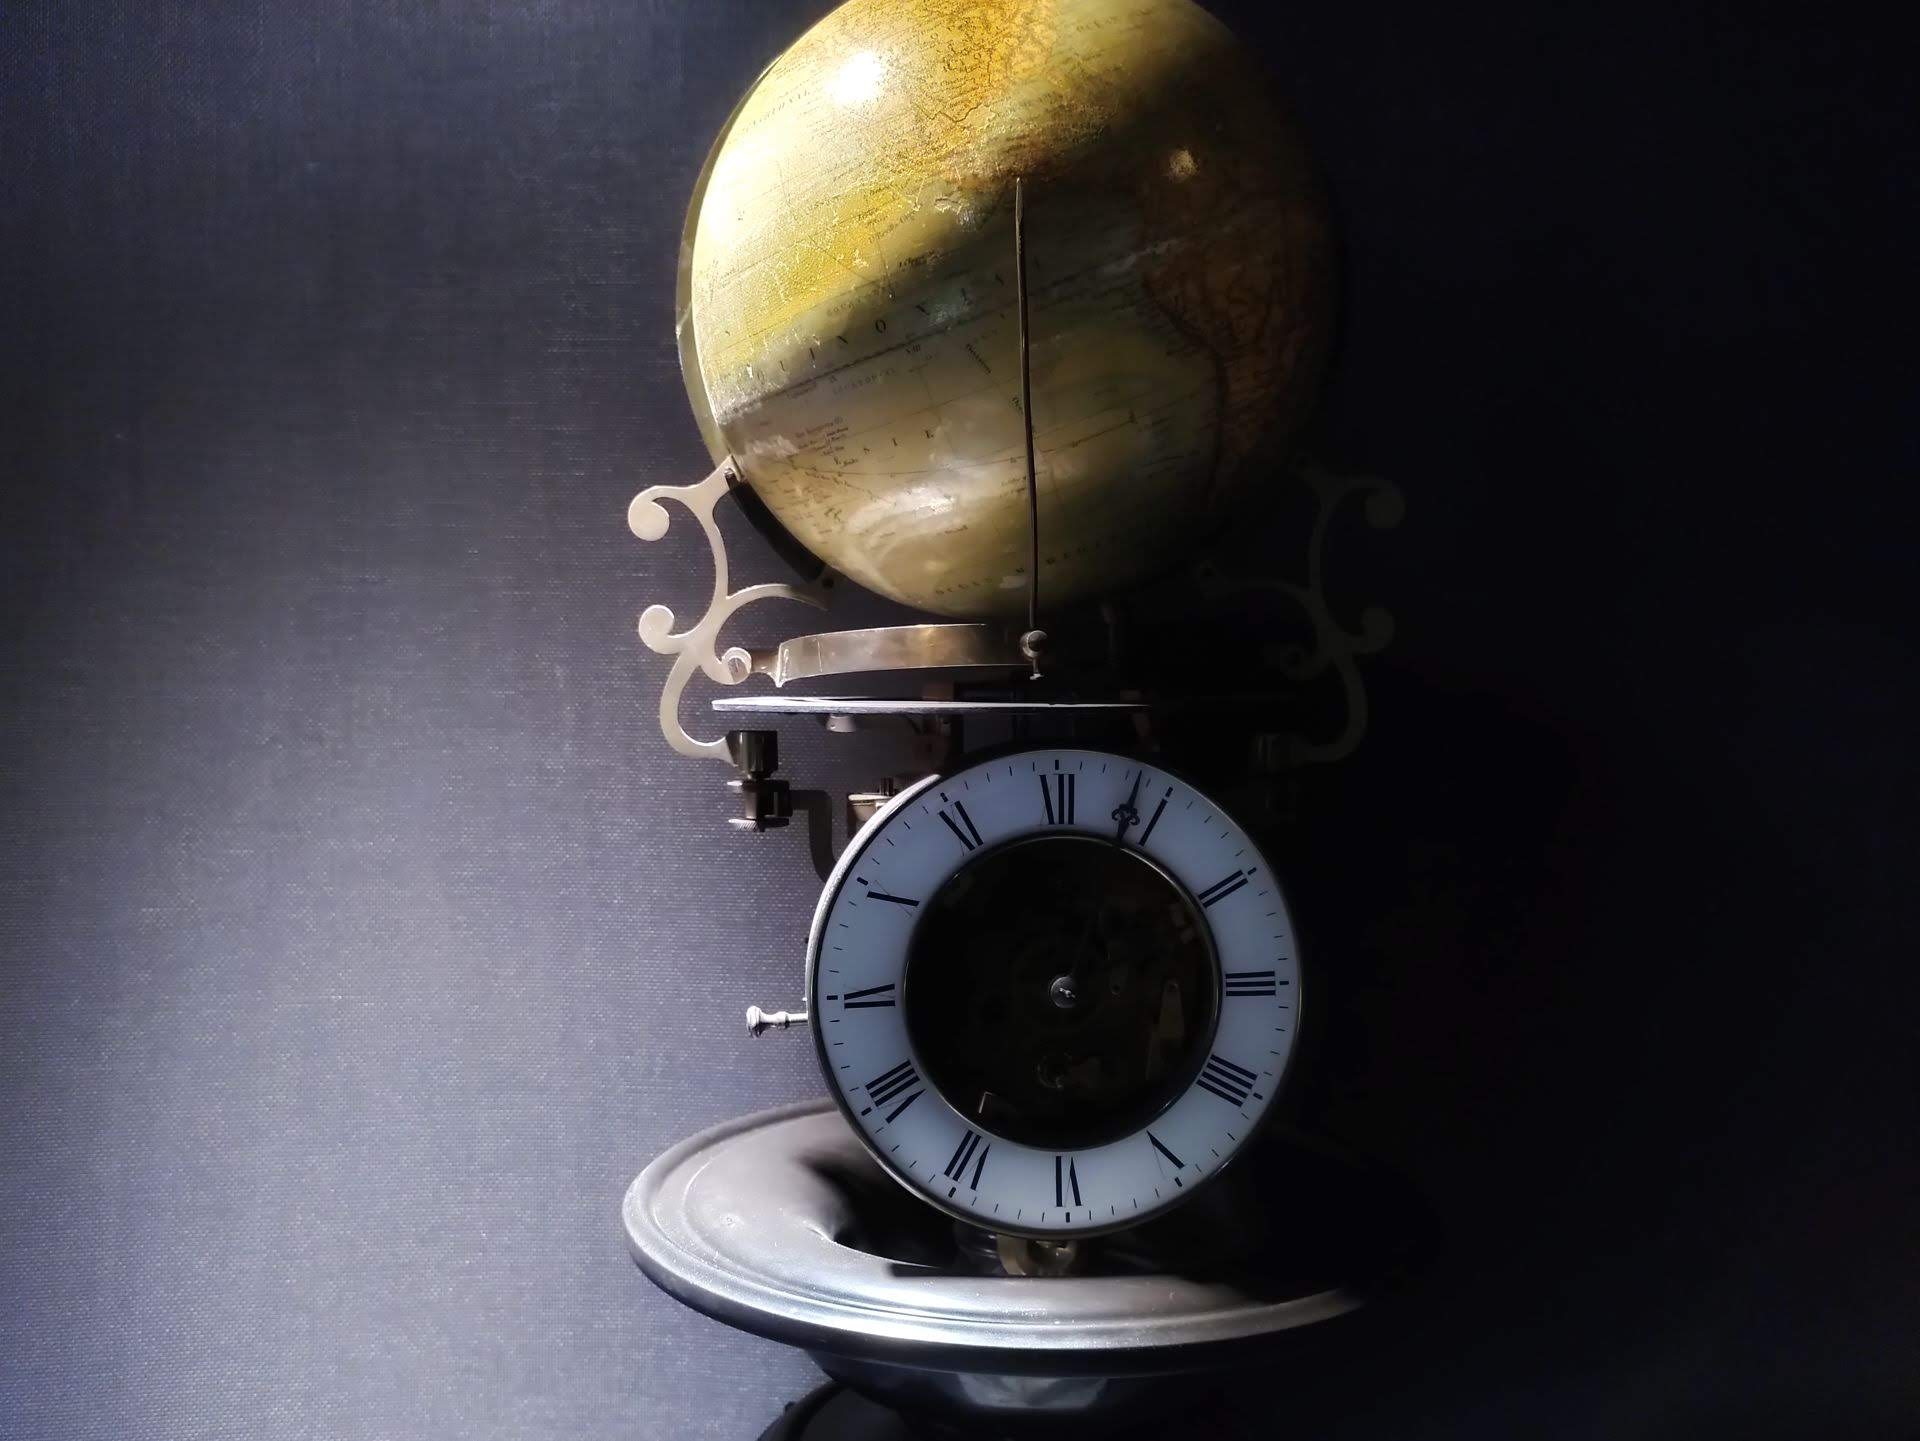 A mechanical globe, showing the path of the sun around the world, with clock underneath.